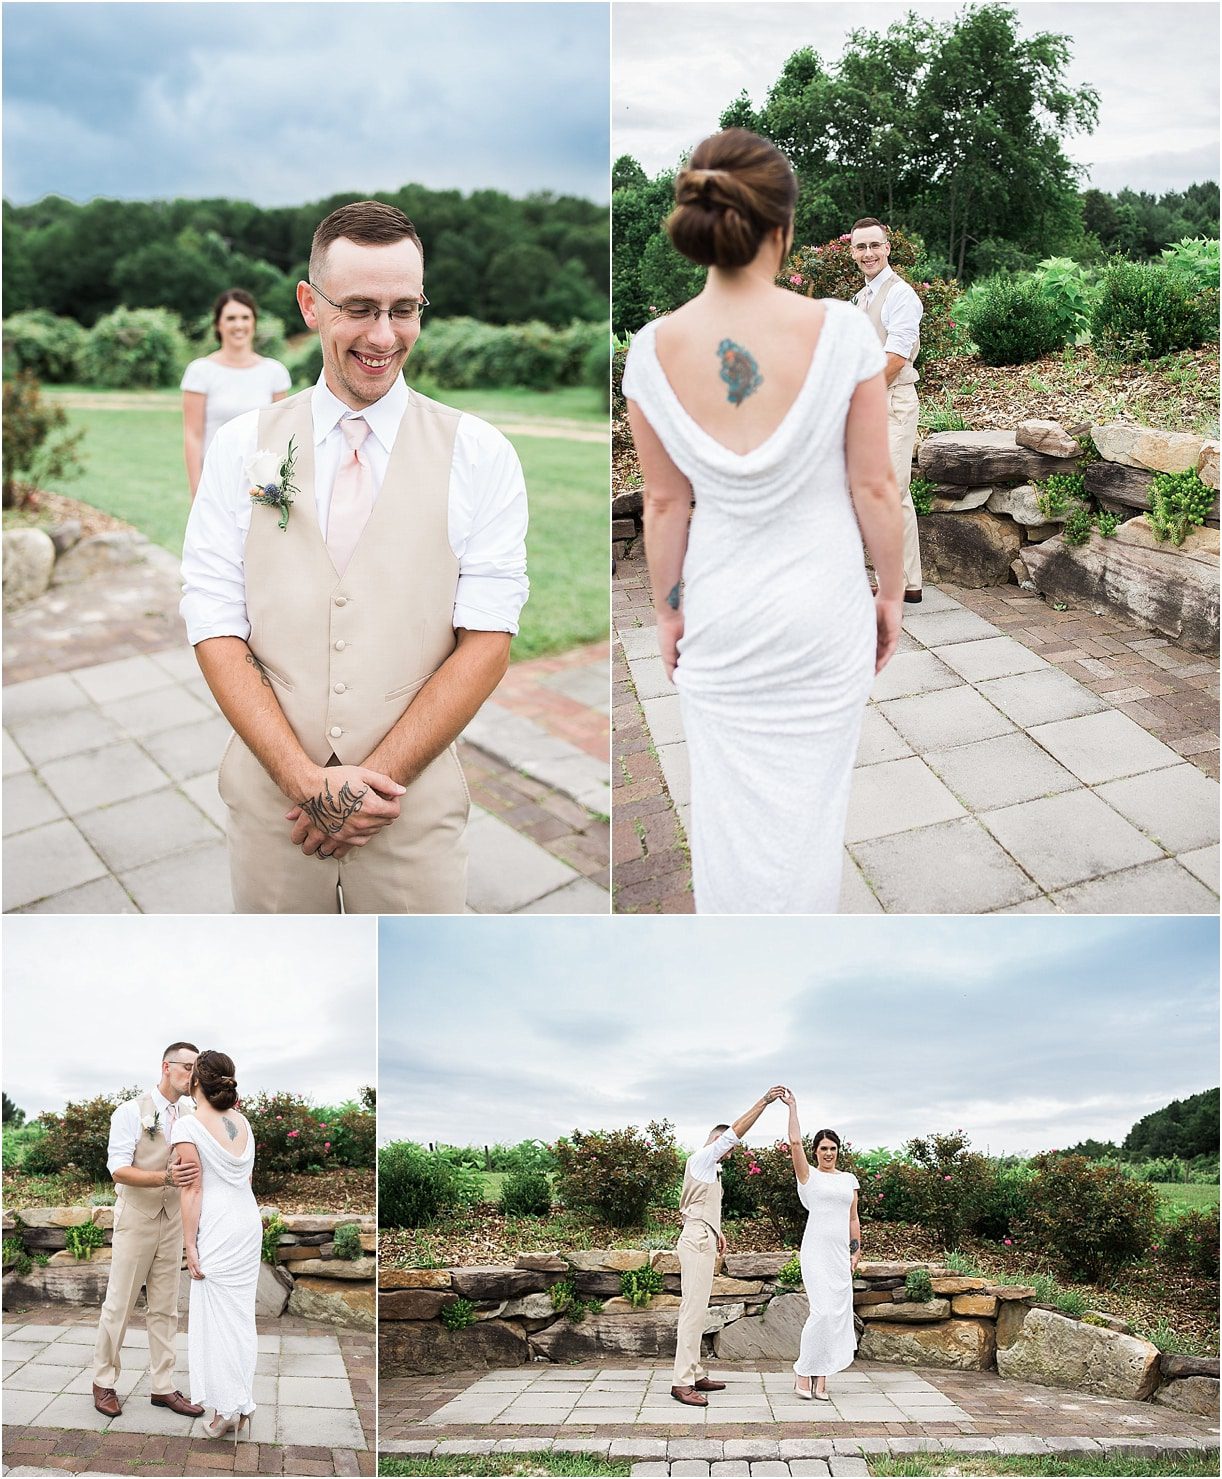 Sentimental Vow Renewal | Hill City Bride Virginia Wedding Blog by Robin Collins Photography - First Look